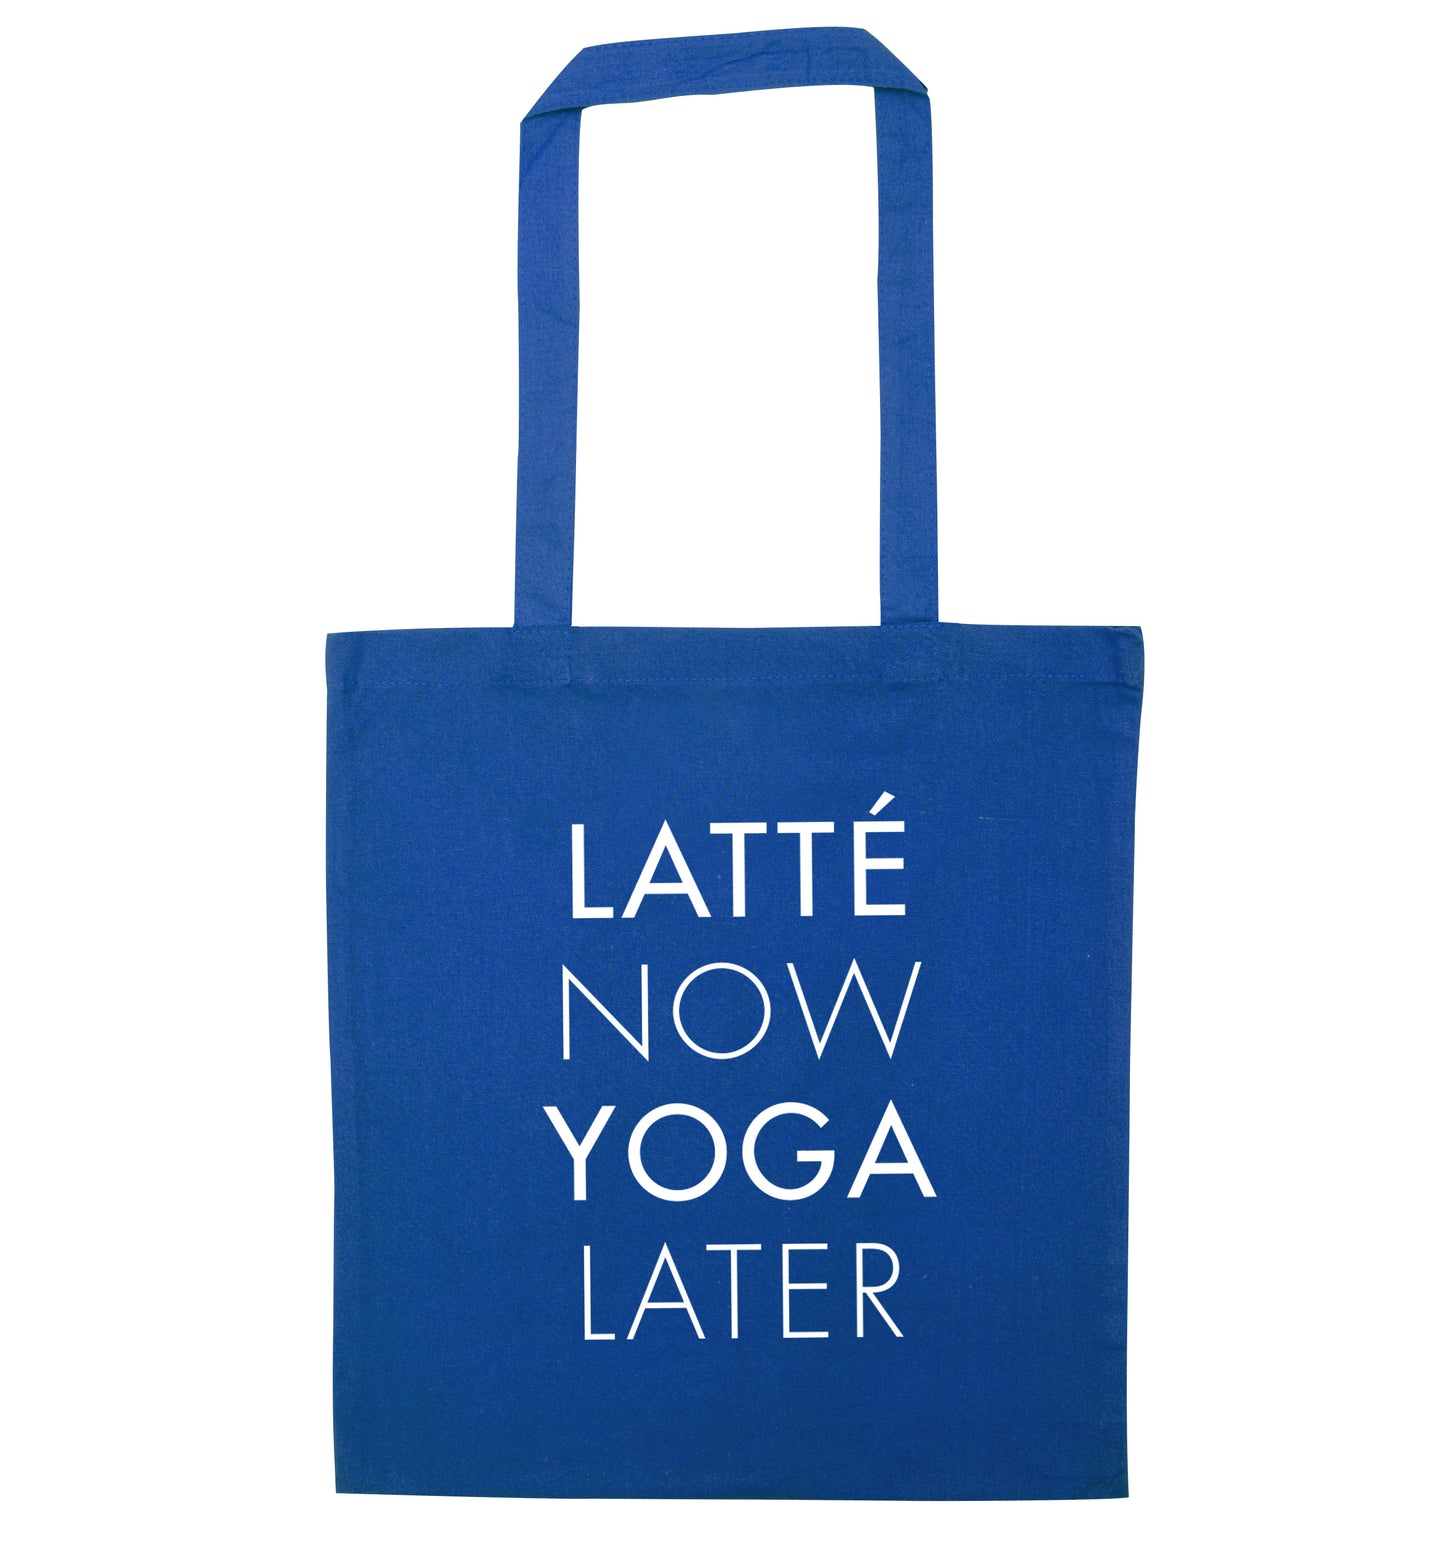 Latte now yoga later blue tote bag